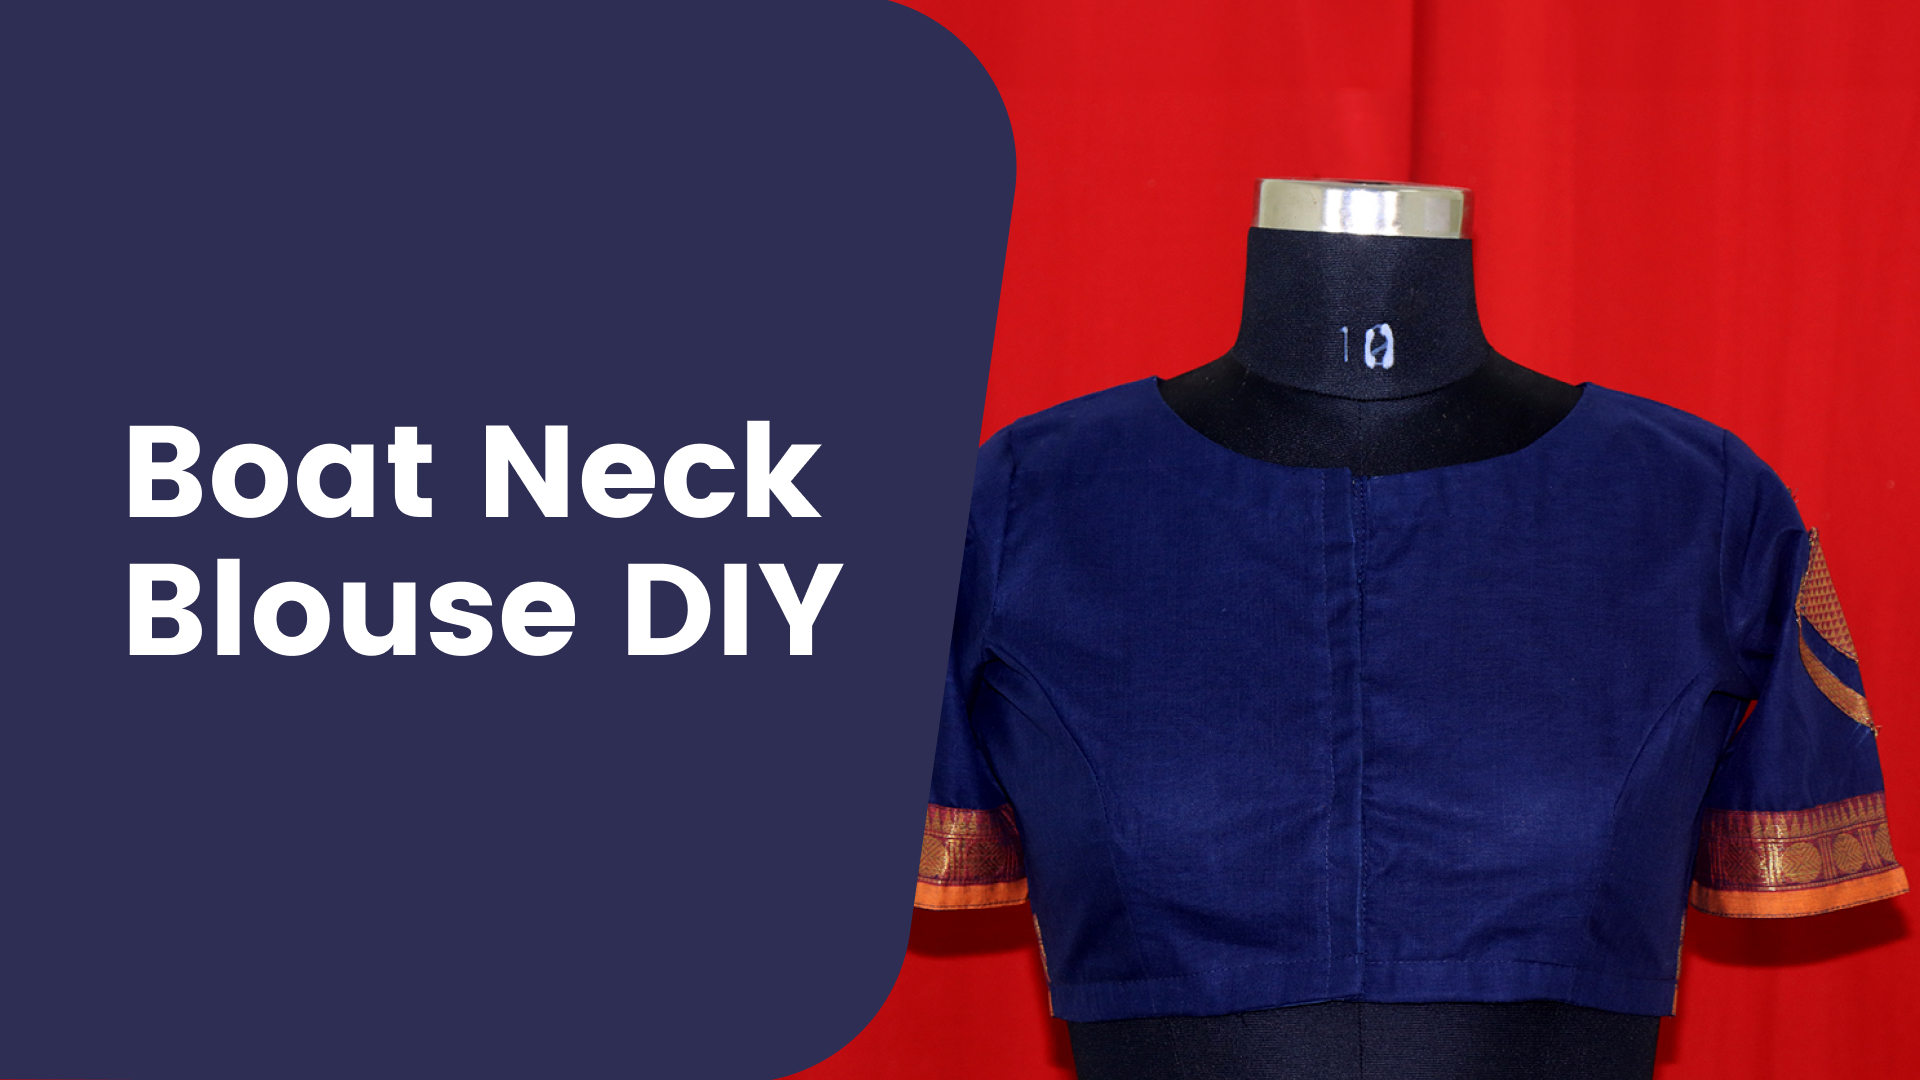 Course Trailer: Learn to Stitch a Boat Neck Blouse. Watch to know more.